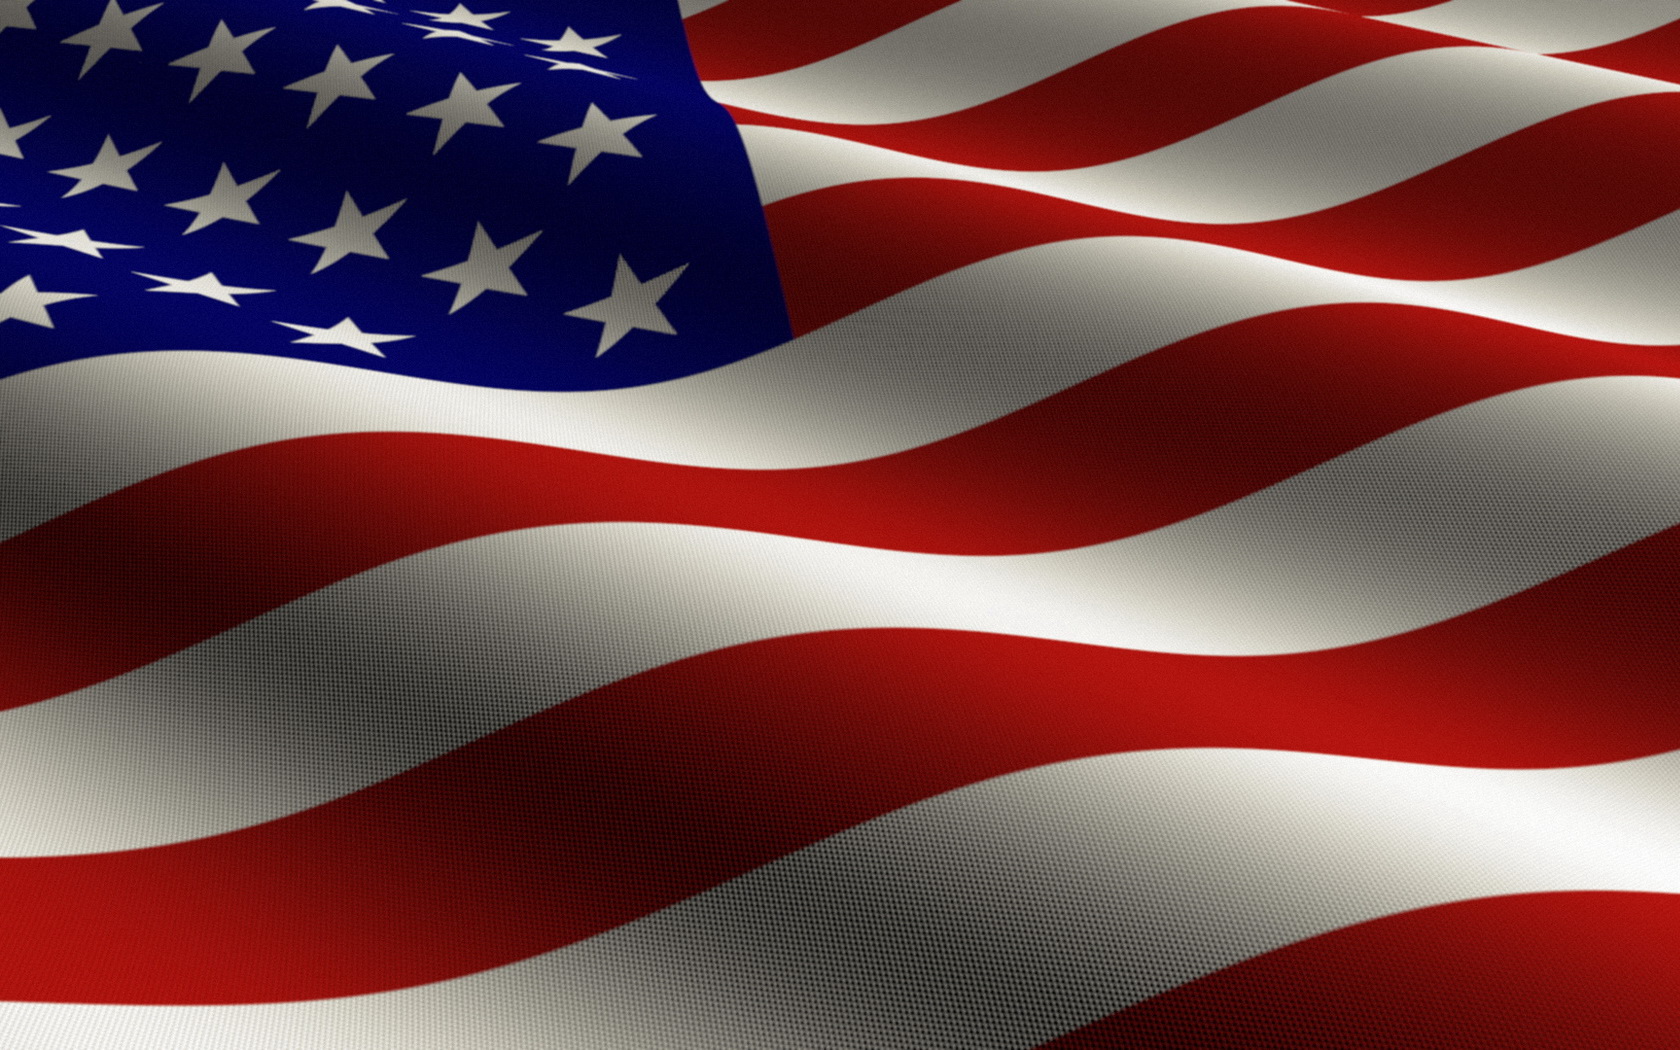 50+ Us flag powerpoint background Templates for Professional Look